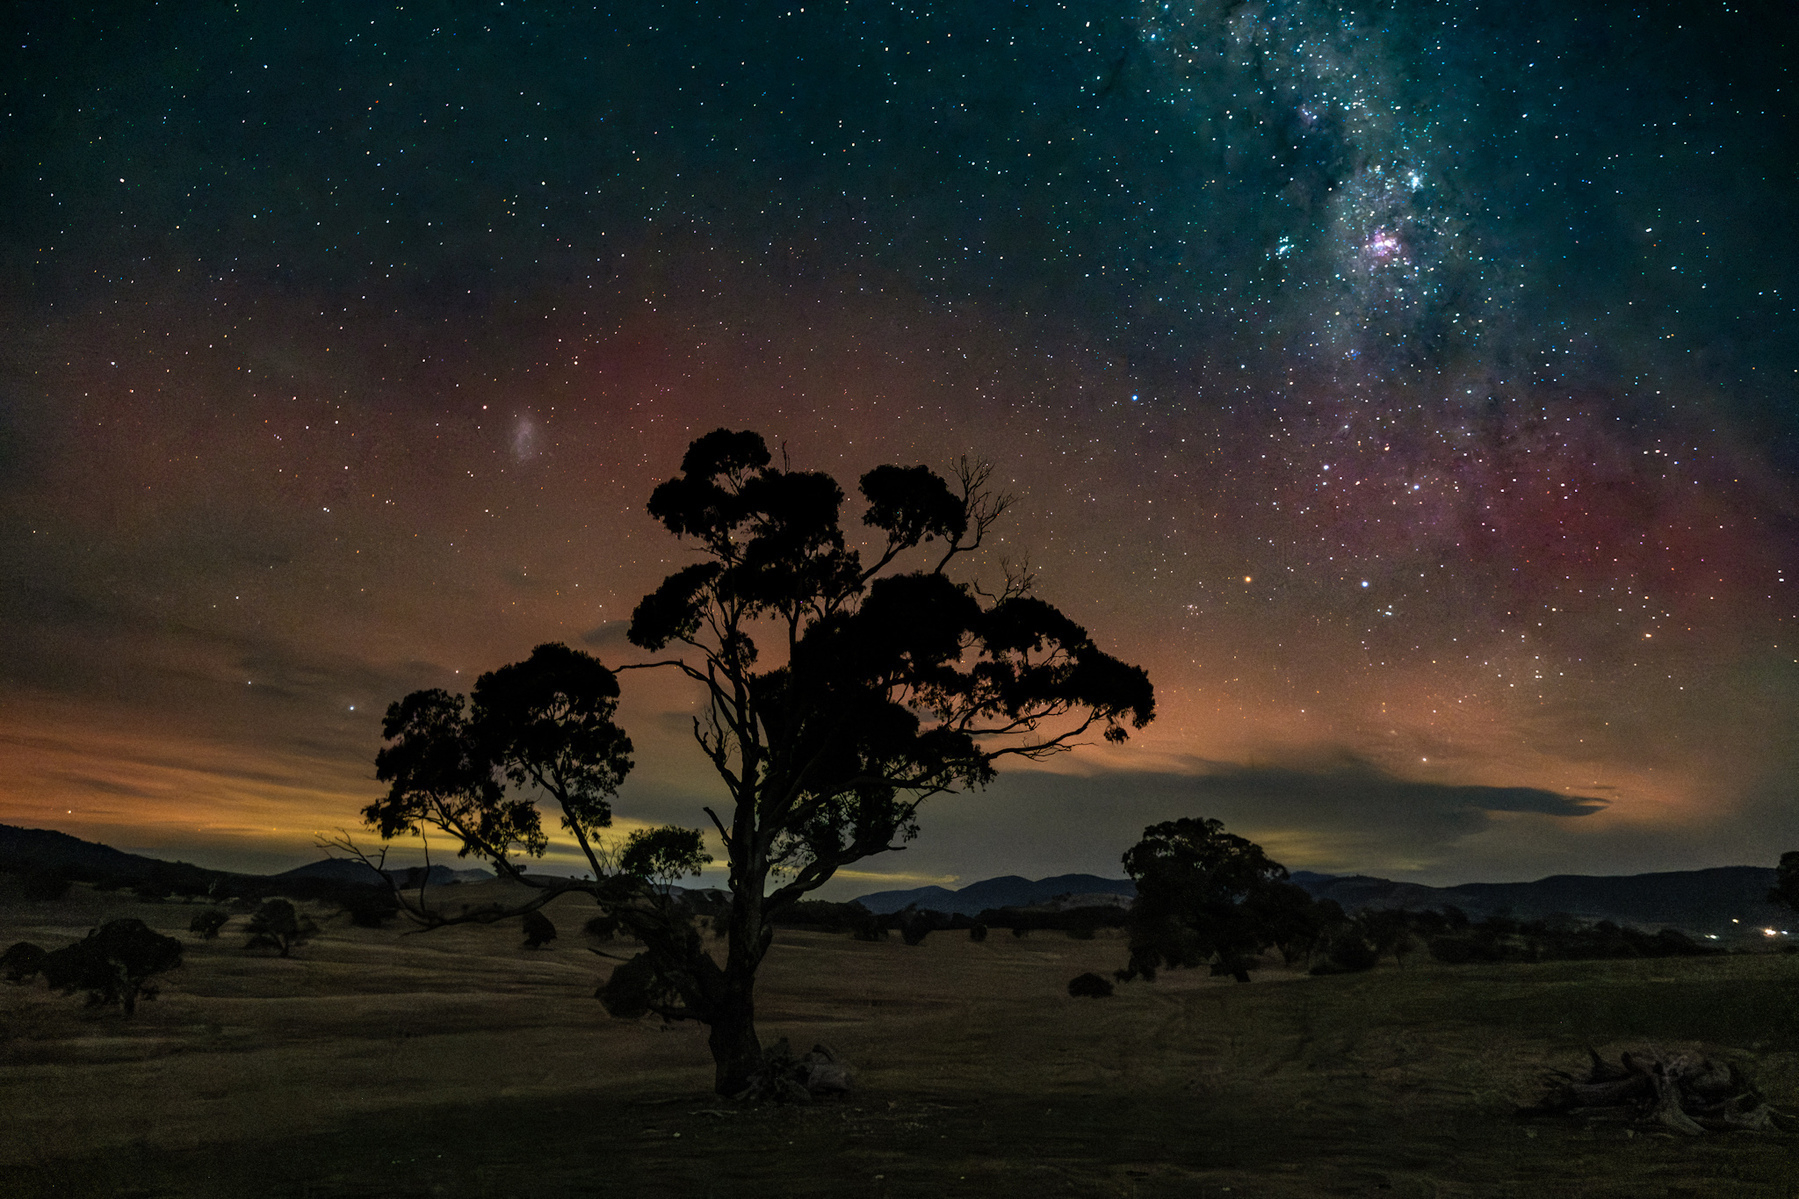 A lone tree on Canberra's southeside with a spectacular Aurora show in the night sky.